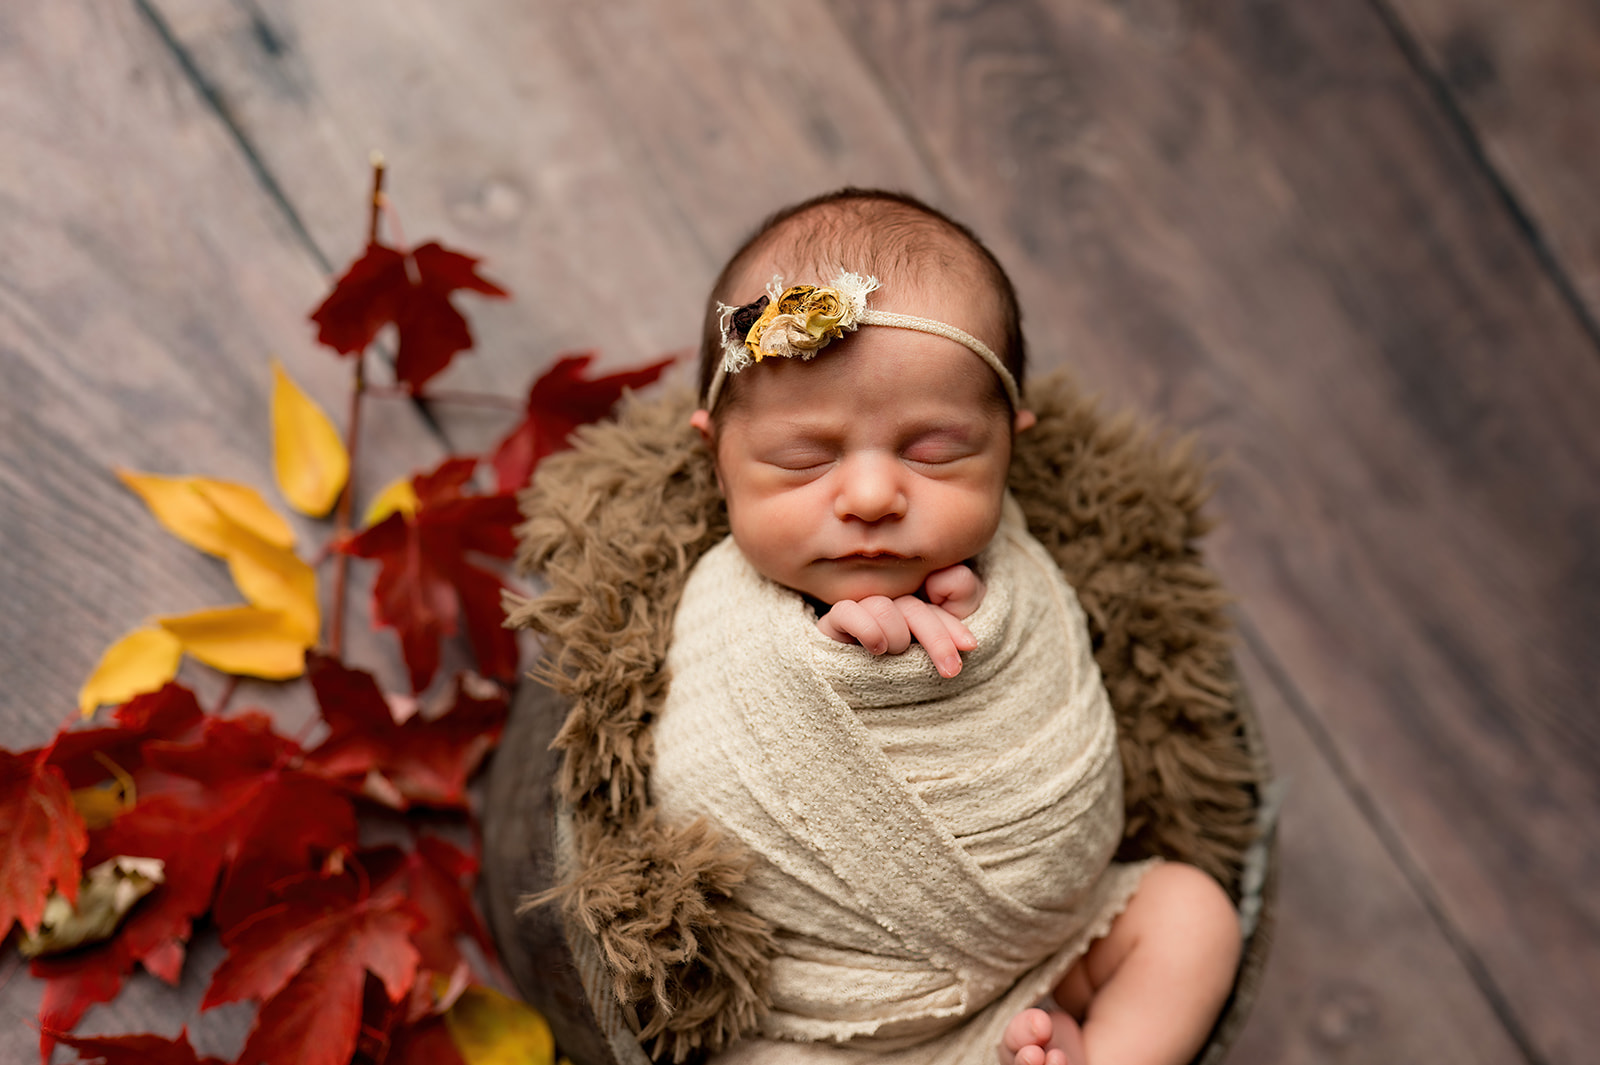 Newborn girl swaddled in cream and surrounded by vibrant yellow and red fall leaves